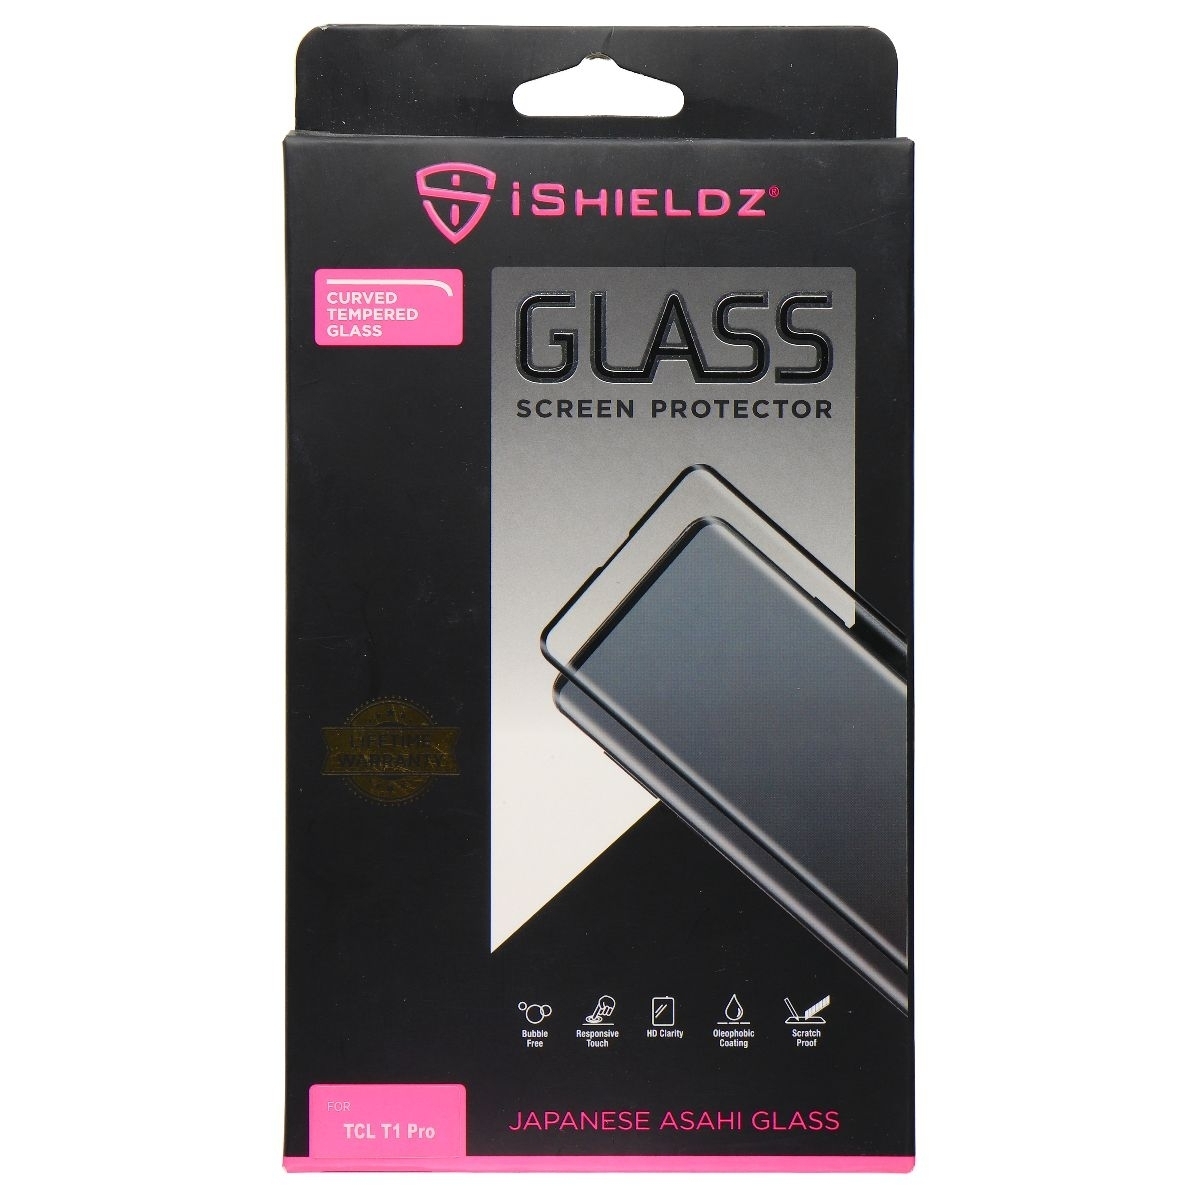 IShieldz Curved Tempered Glass Screen Protector For TCL T1 Pro - Clear (Refurbished)